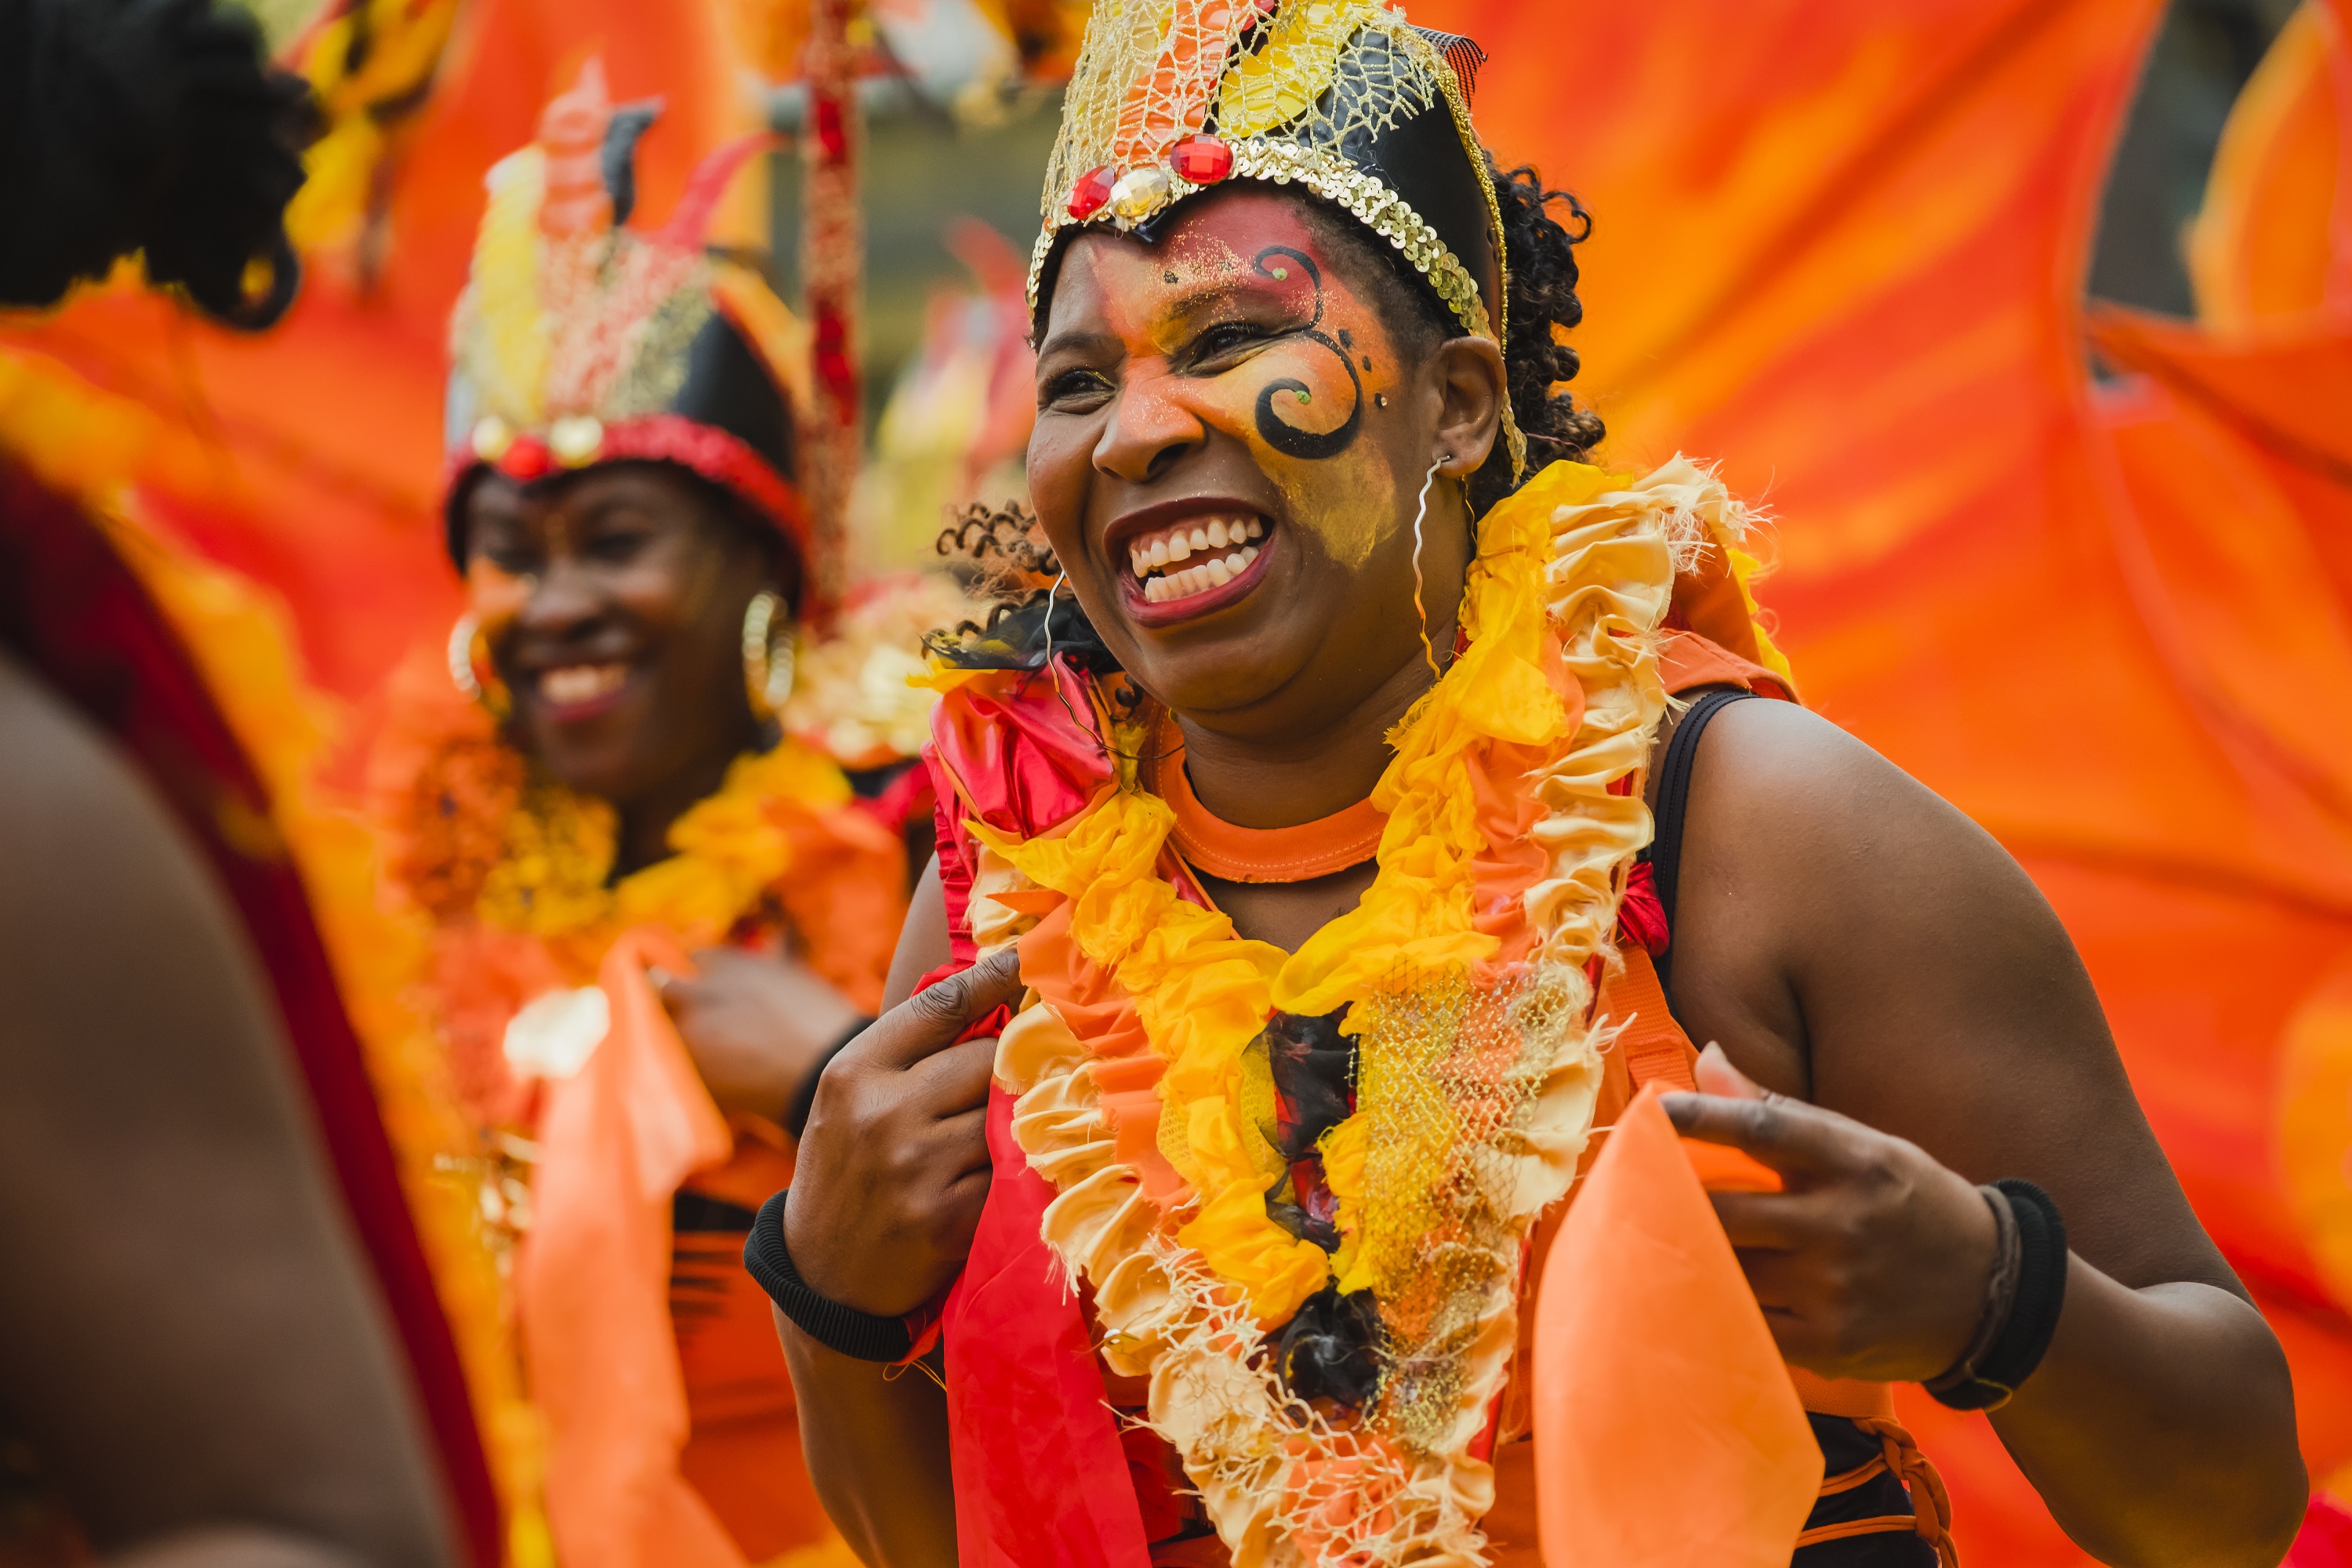 The ACE Dance Caribbean Carnival at the Birmingham Weekender